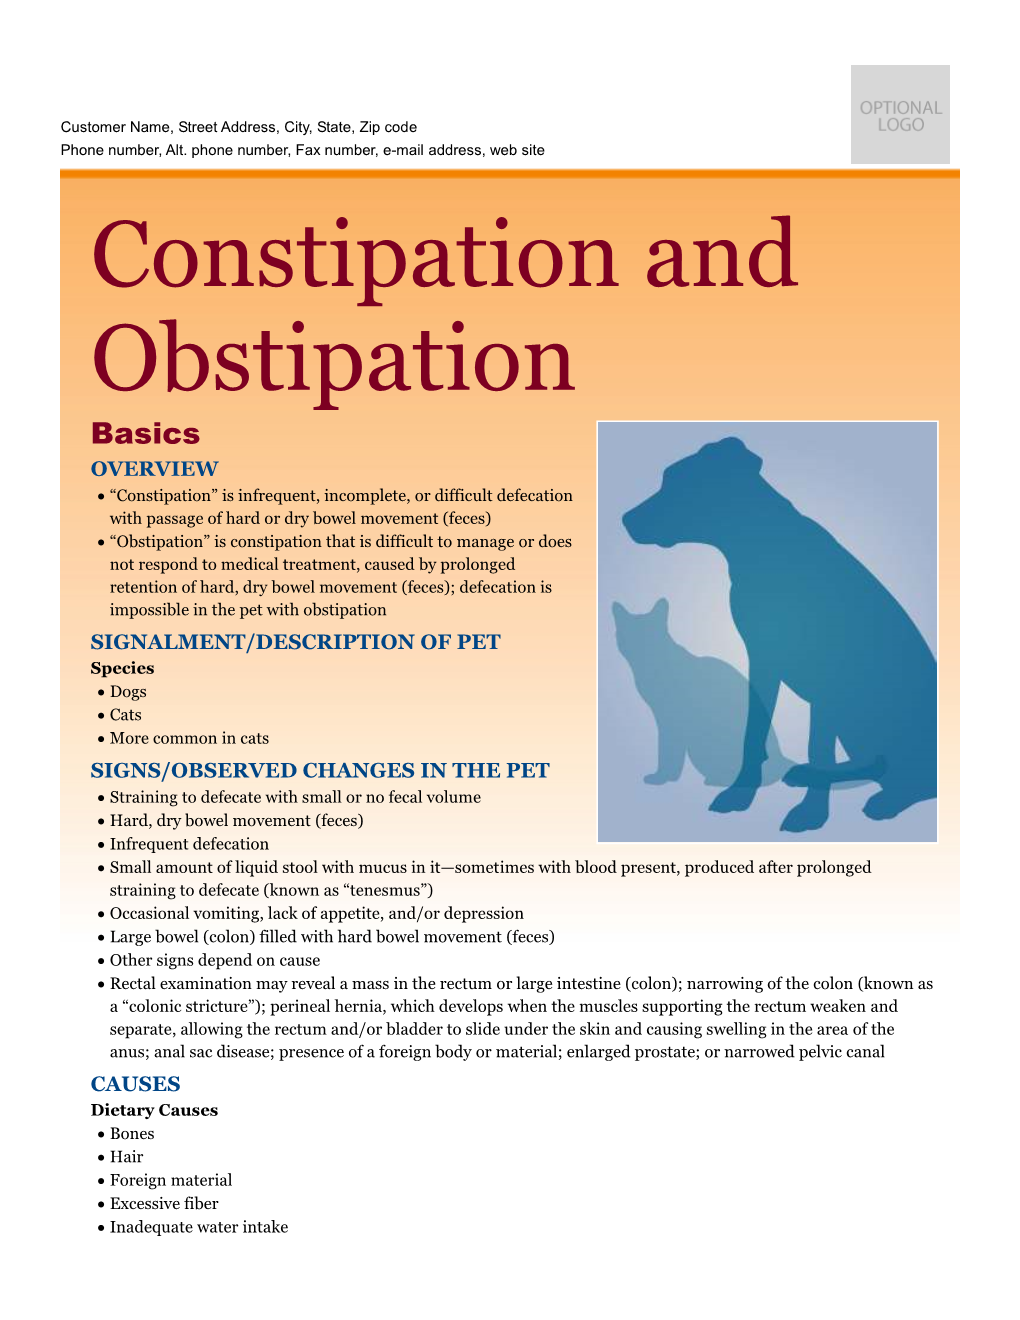 Constipation and Obstipation